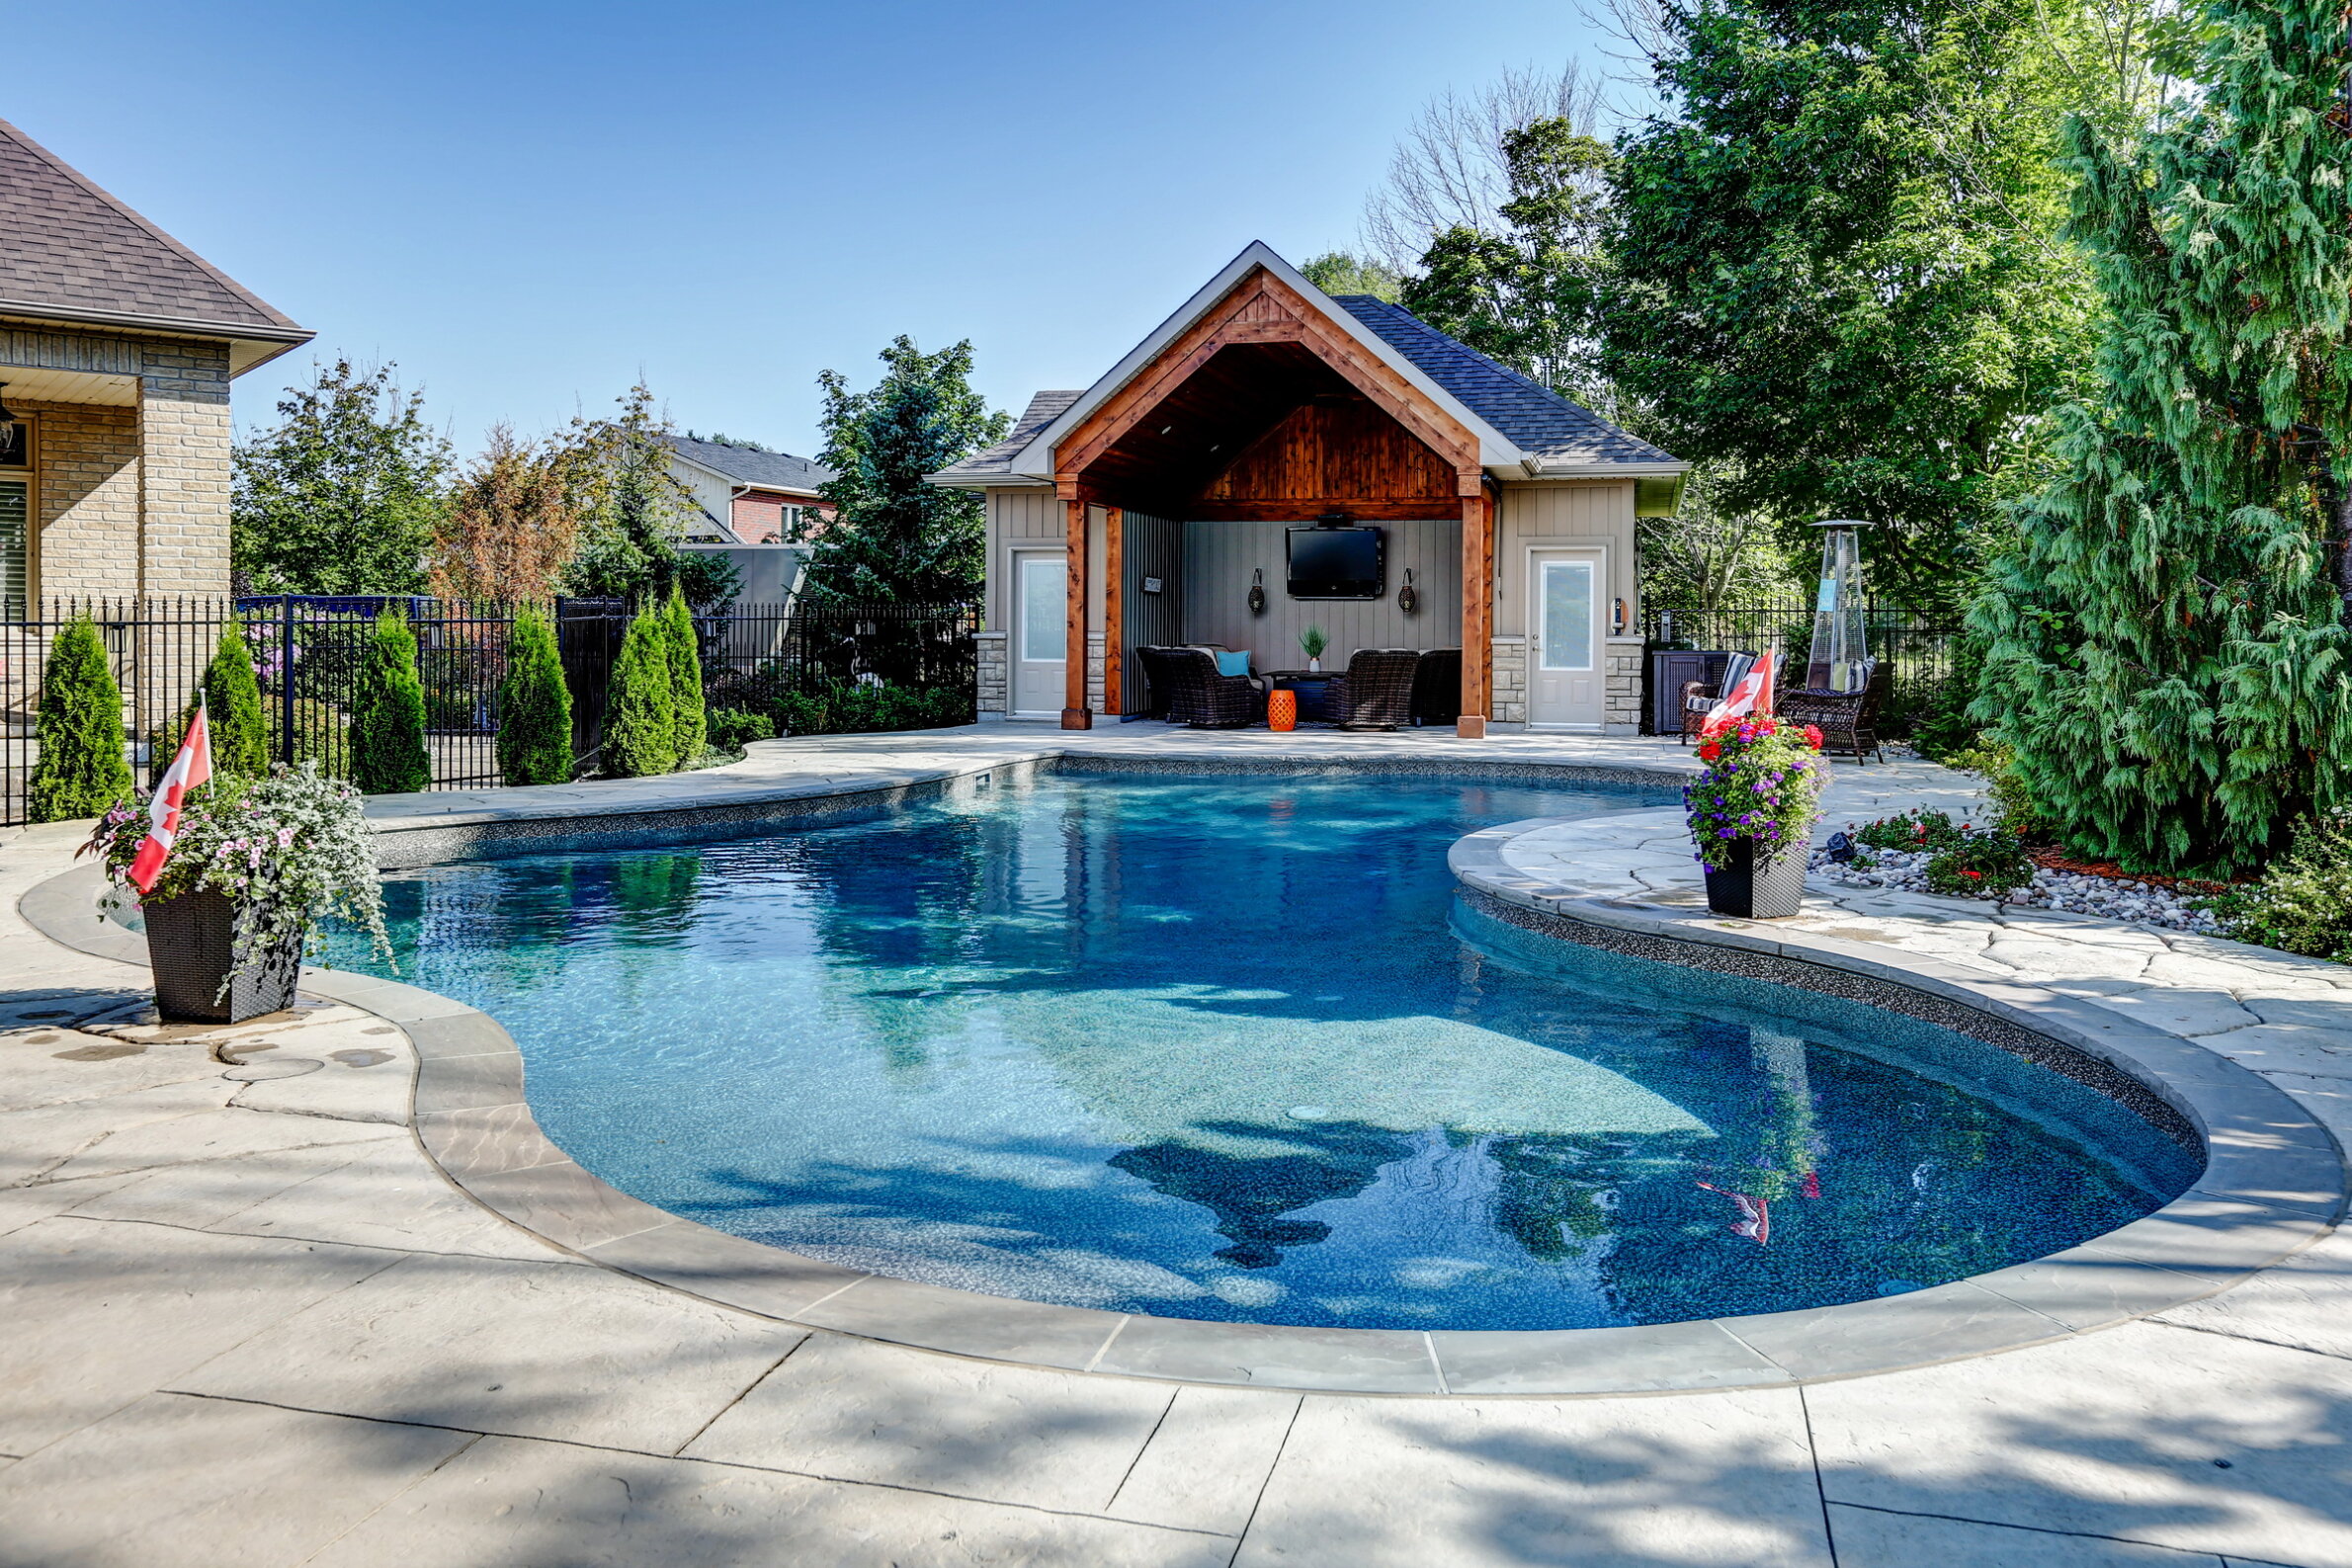 A luxurious backyard with a curved swimming pool, a pool house, vibrant flowers, a Canadian flag, and green landscaping under a clear blue sky.